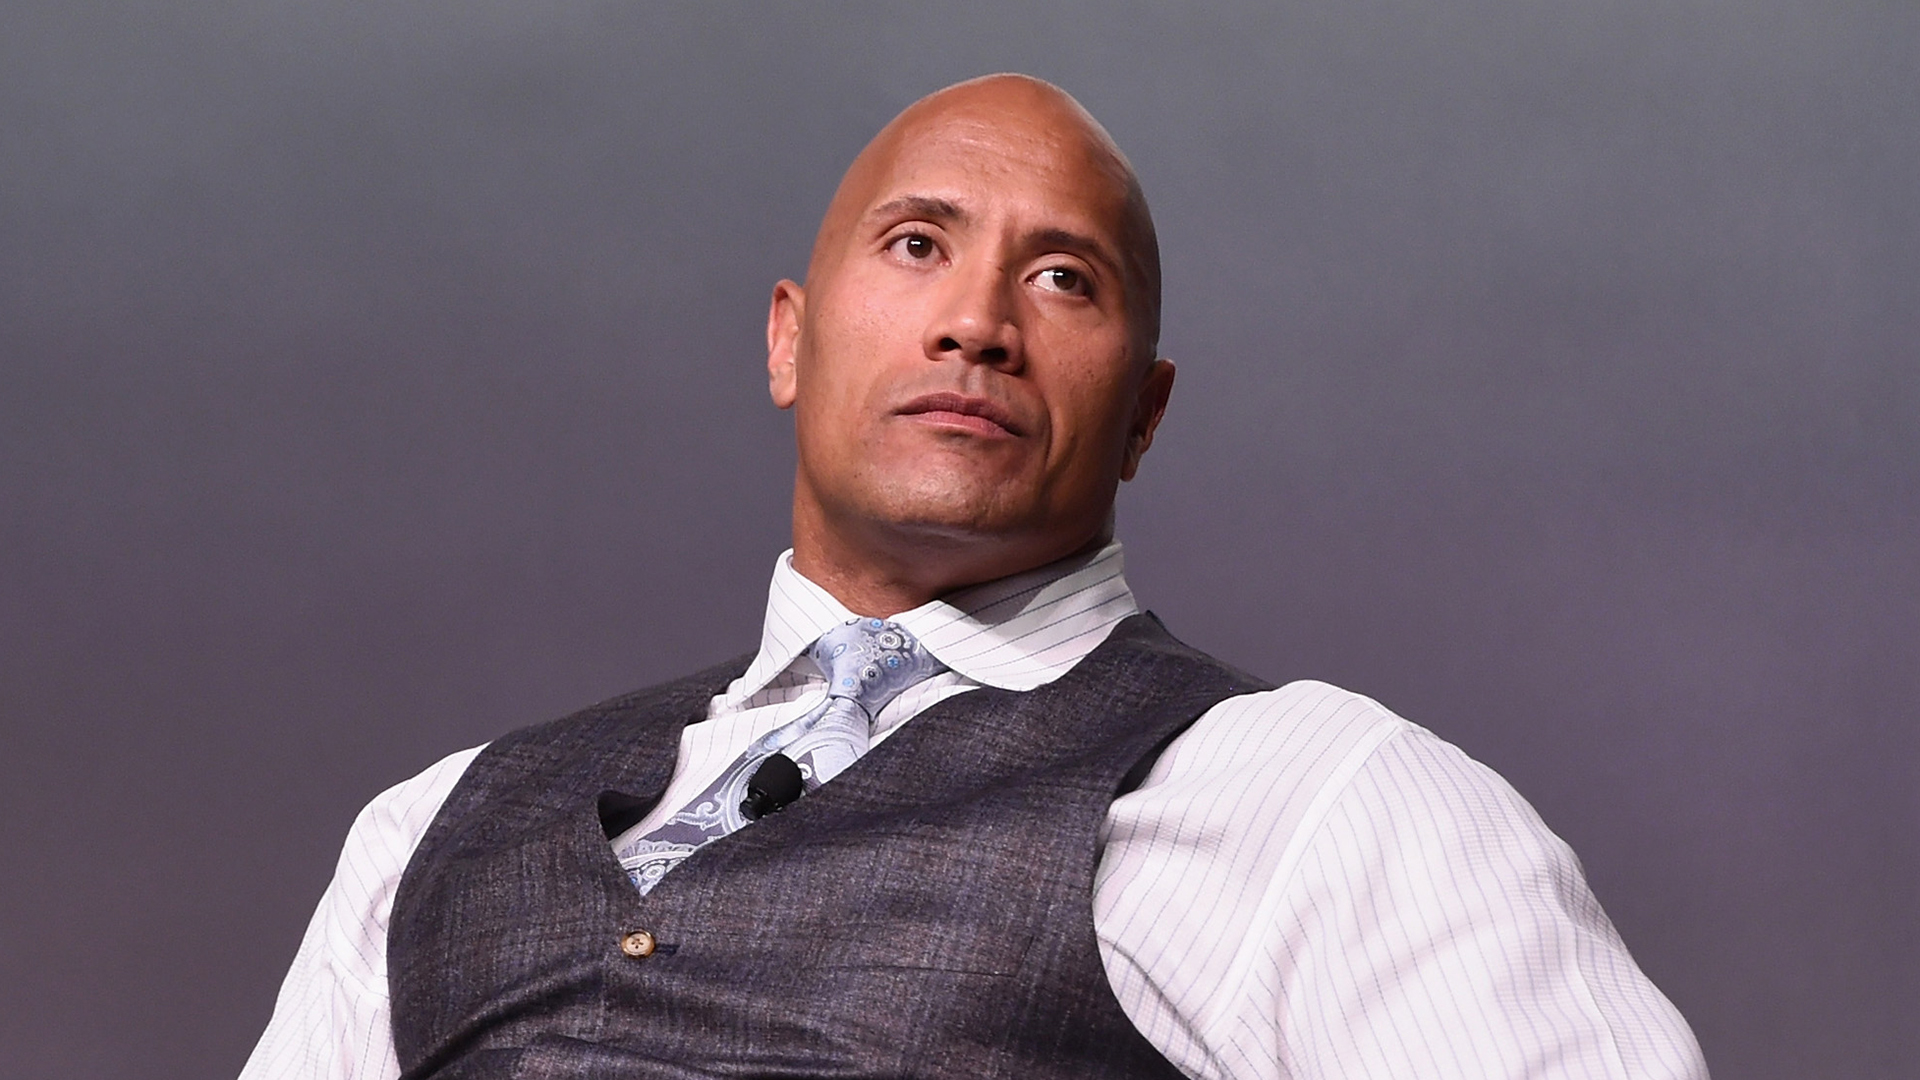 See Dwayne 'The Rock' Johnson's inspiring message for people with depression